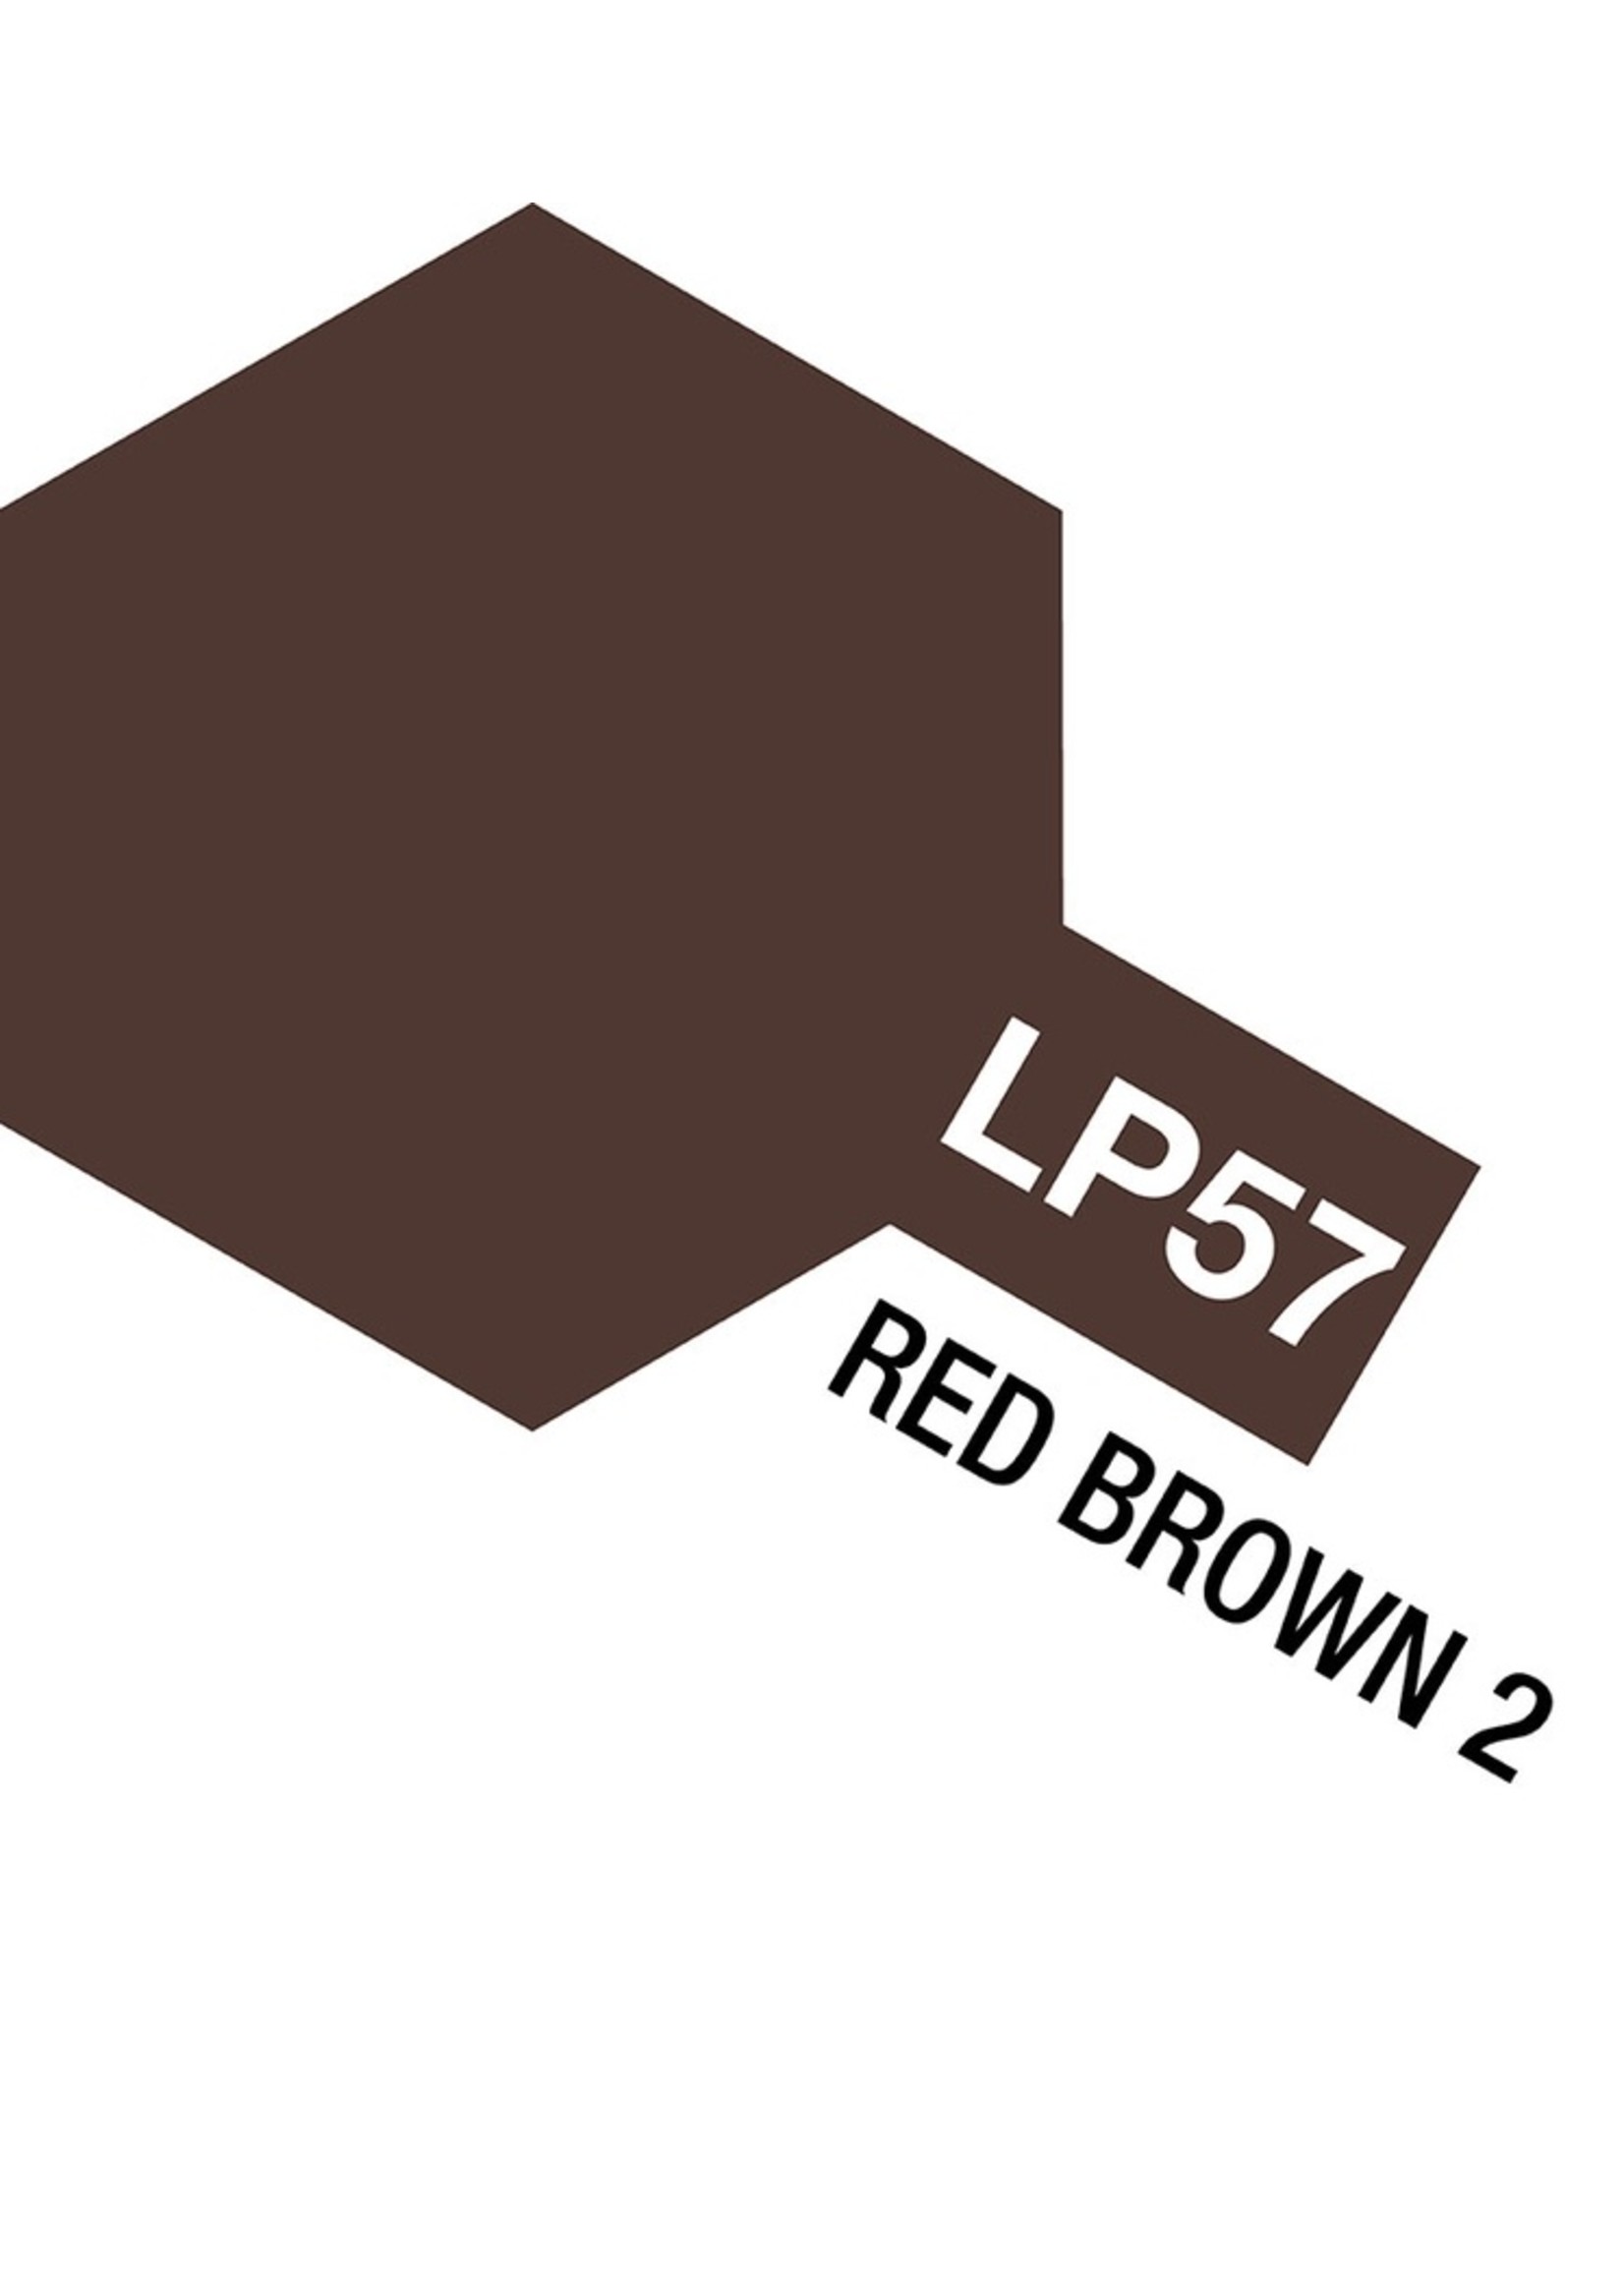 Tamiya 82157 - LP-57 Red Brown 2 Lacquer Paint 10ml